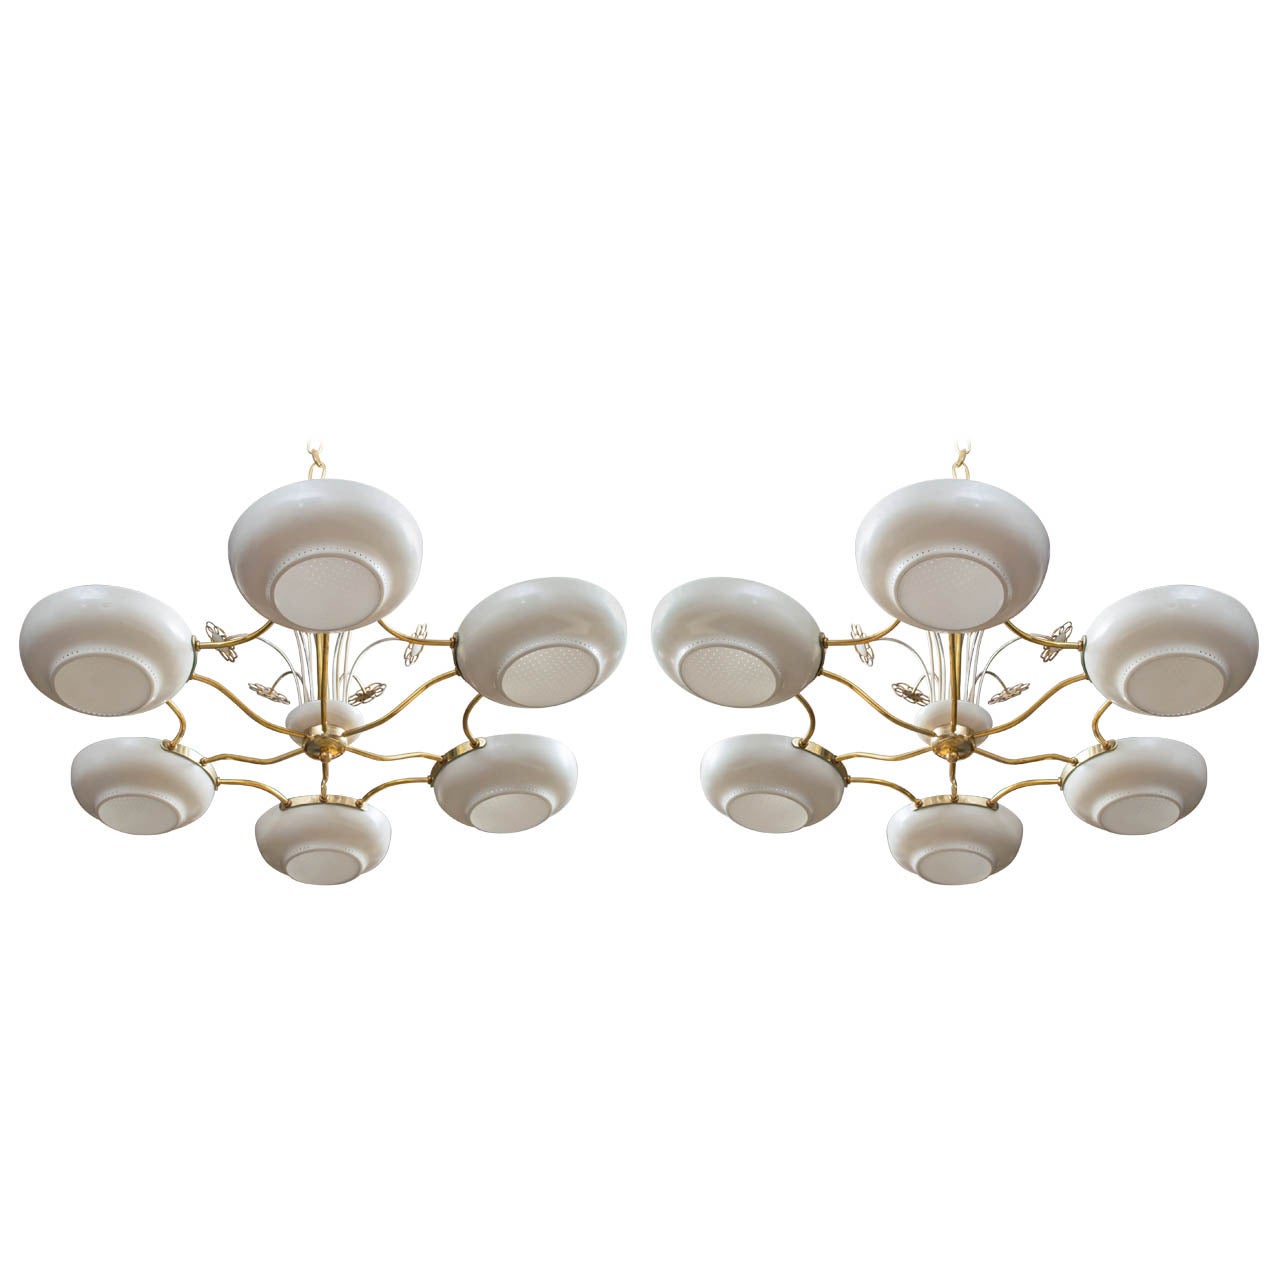 Paavo Tynell for Lightolier - Pair of Chandeliers